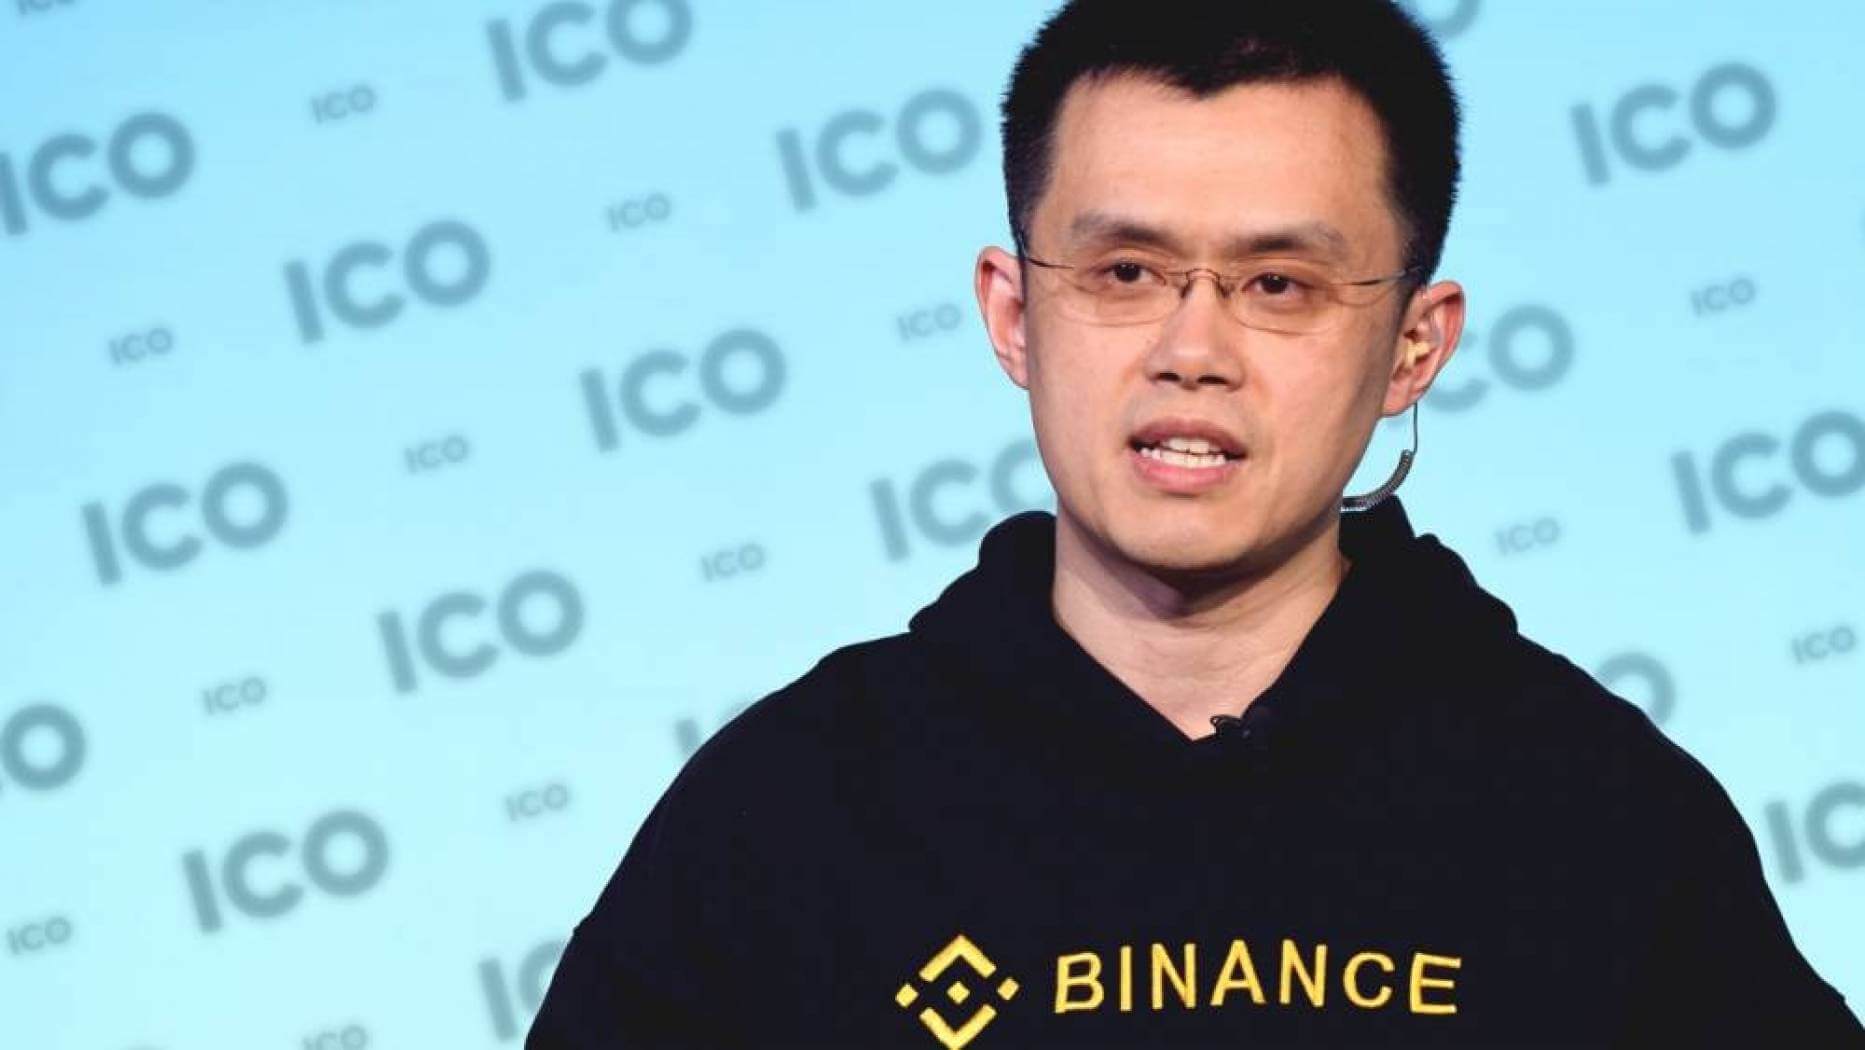 2018 Is a ‘Correction Year’ According to the CEO of Binance